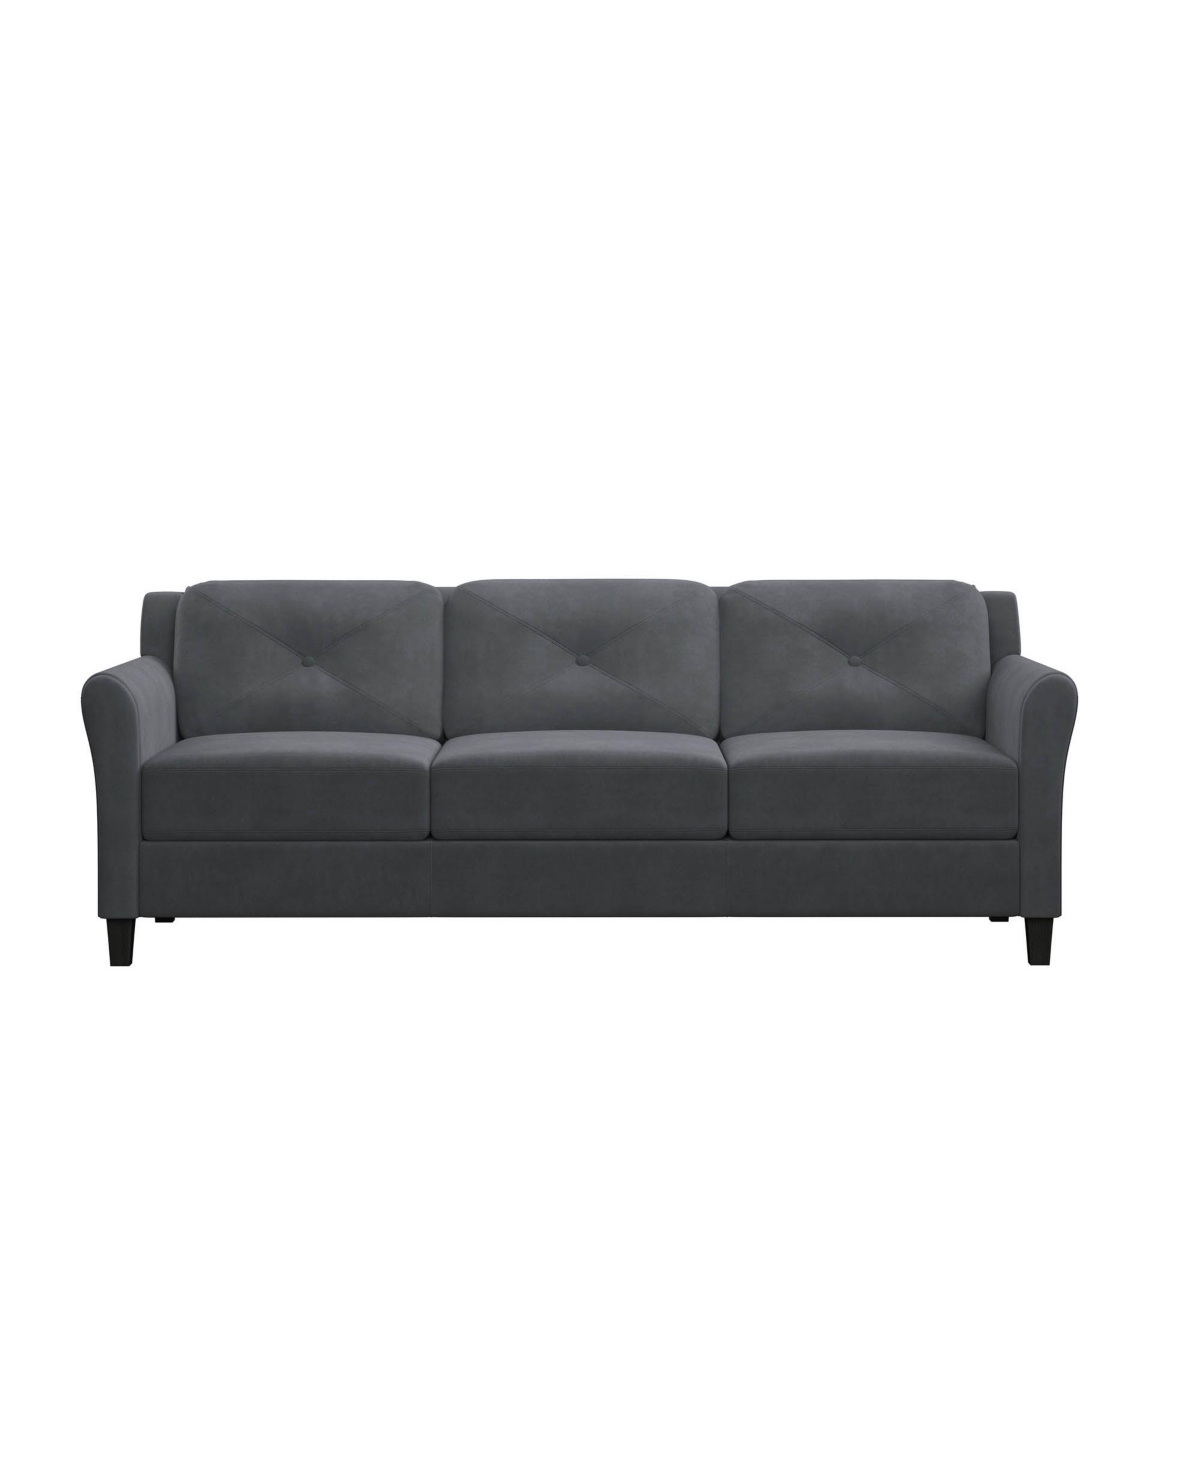 Lifestyle Solutions Harvard Sofa With Rolled Arms In Dark Gray